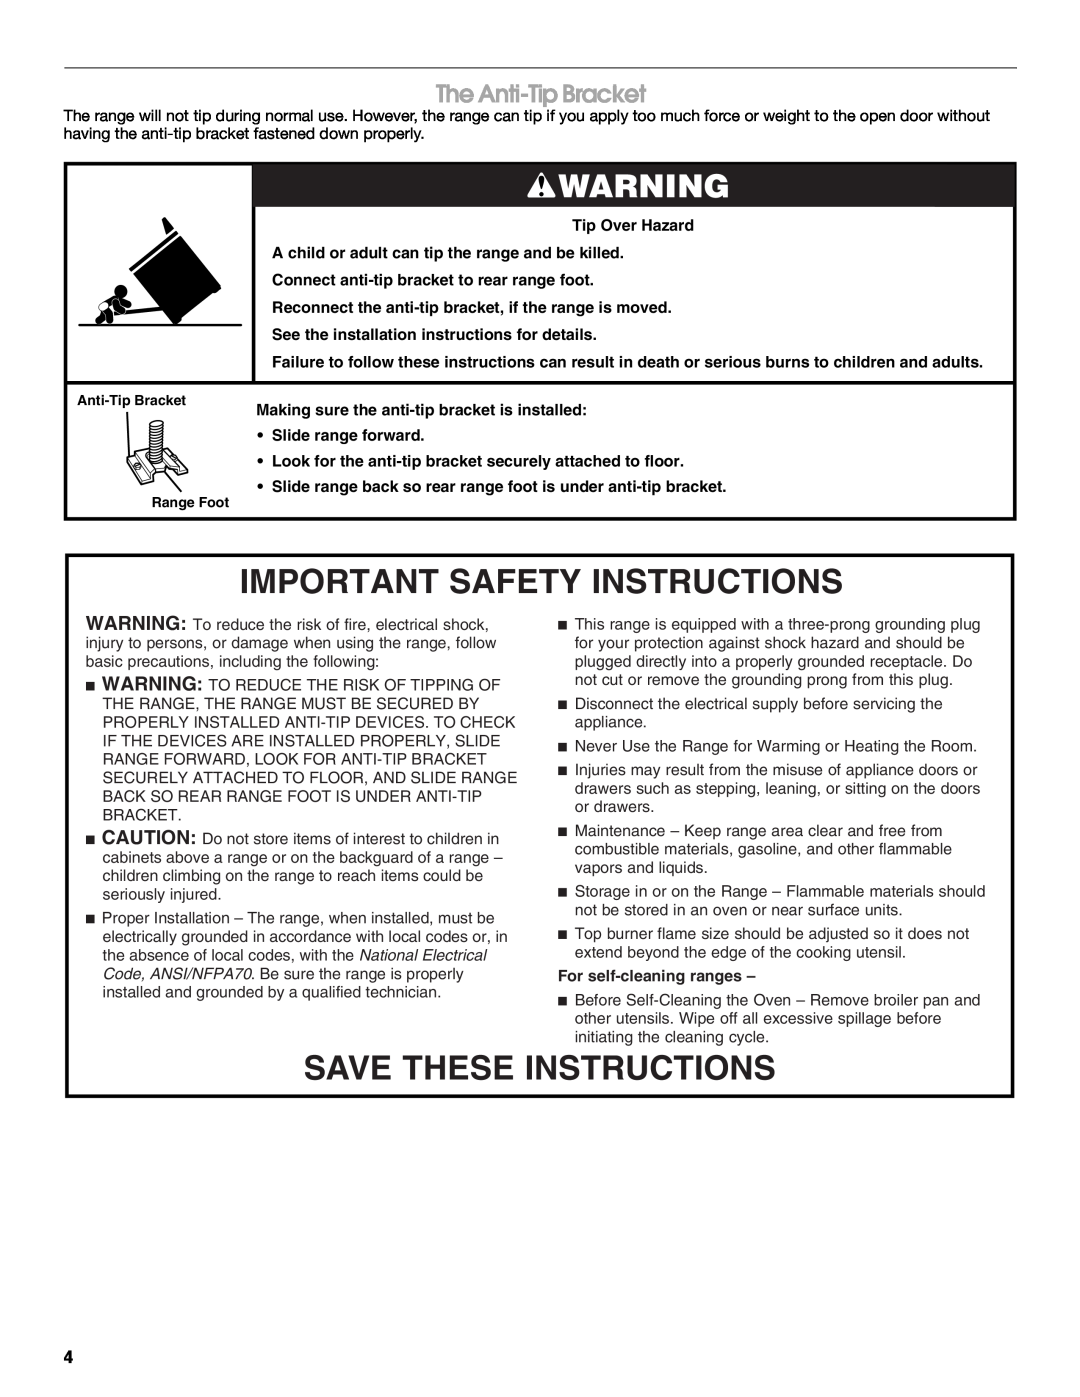 Whirlpool W10017570 The Anti-Tip Bracket, Important Safety Instructions, Save These Instructions, For self-cleaning ranges 